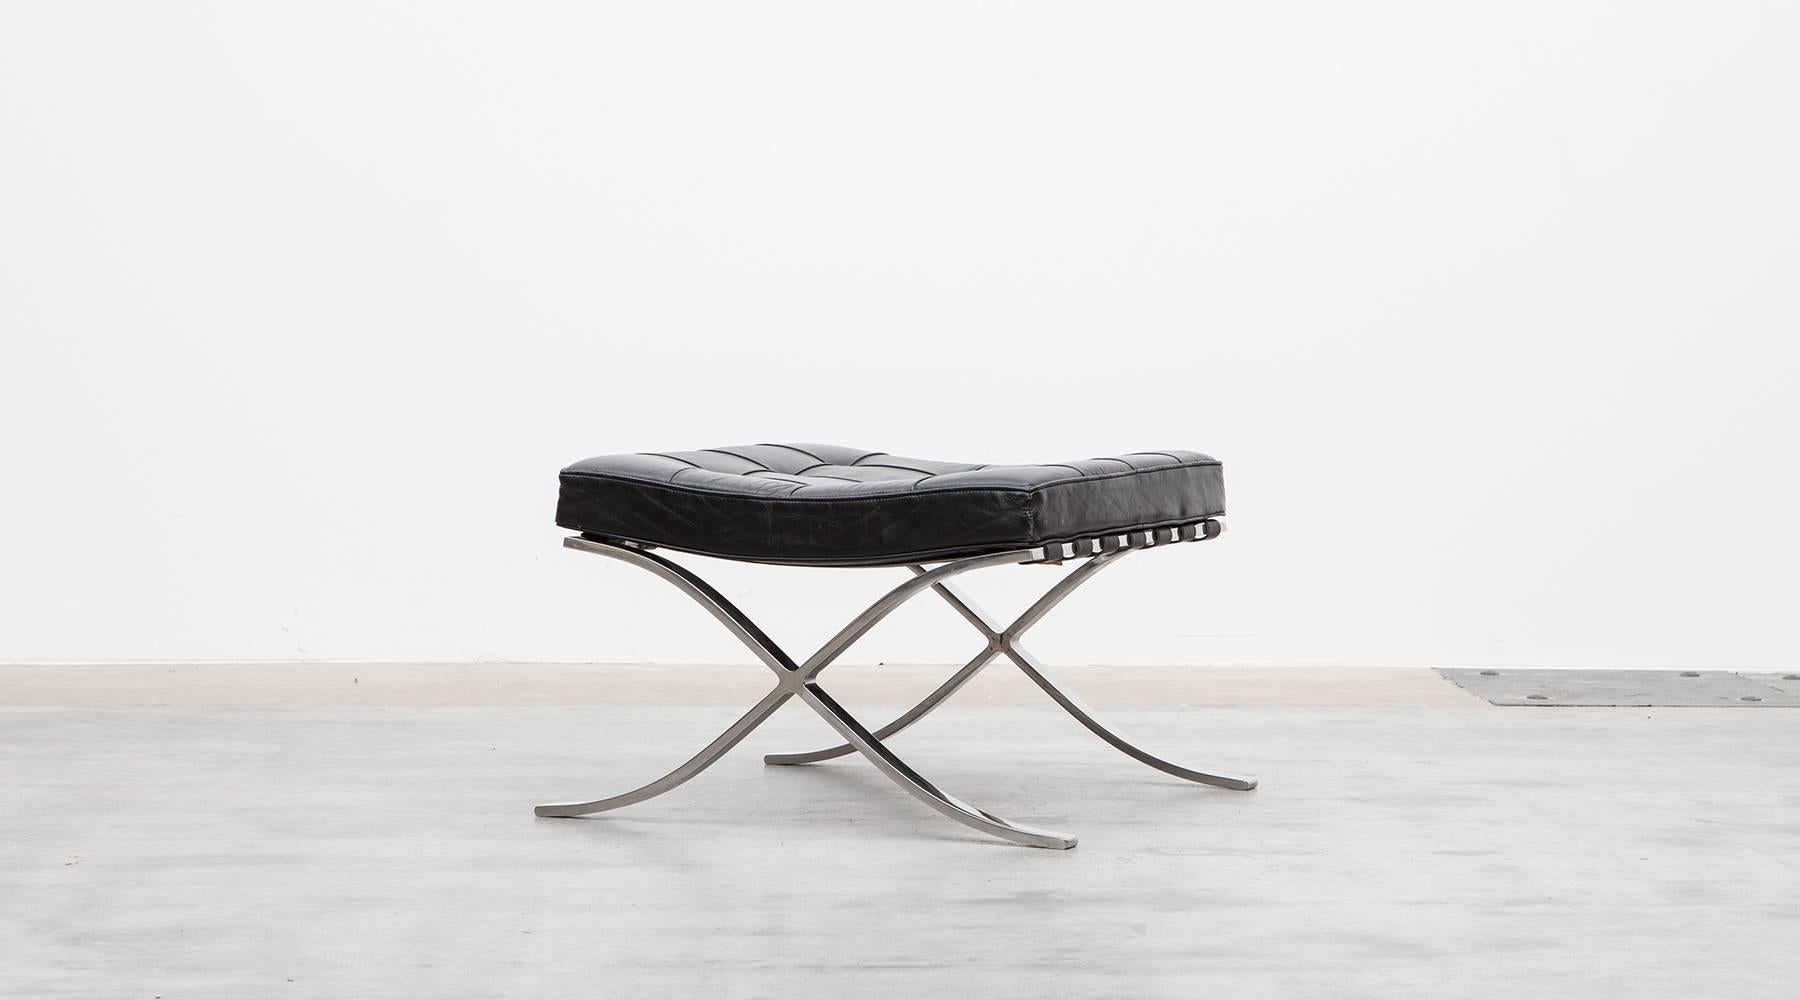 Stunning single Ottoman by famous Mies van der Rohe. Original leather cushions and straps with in very good condition and nice patina. Timeless classic, produced by Knoll International. Ludwig Mies van der Rohe is a central figure in design and